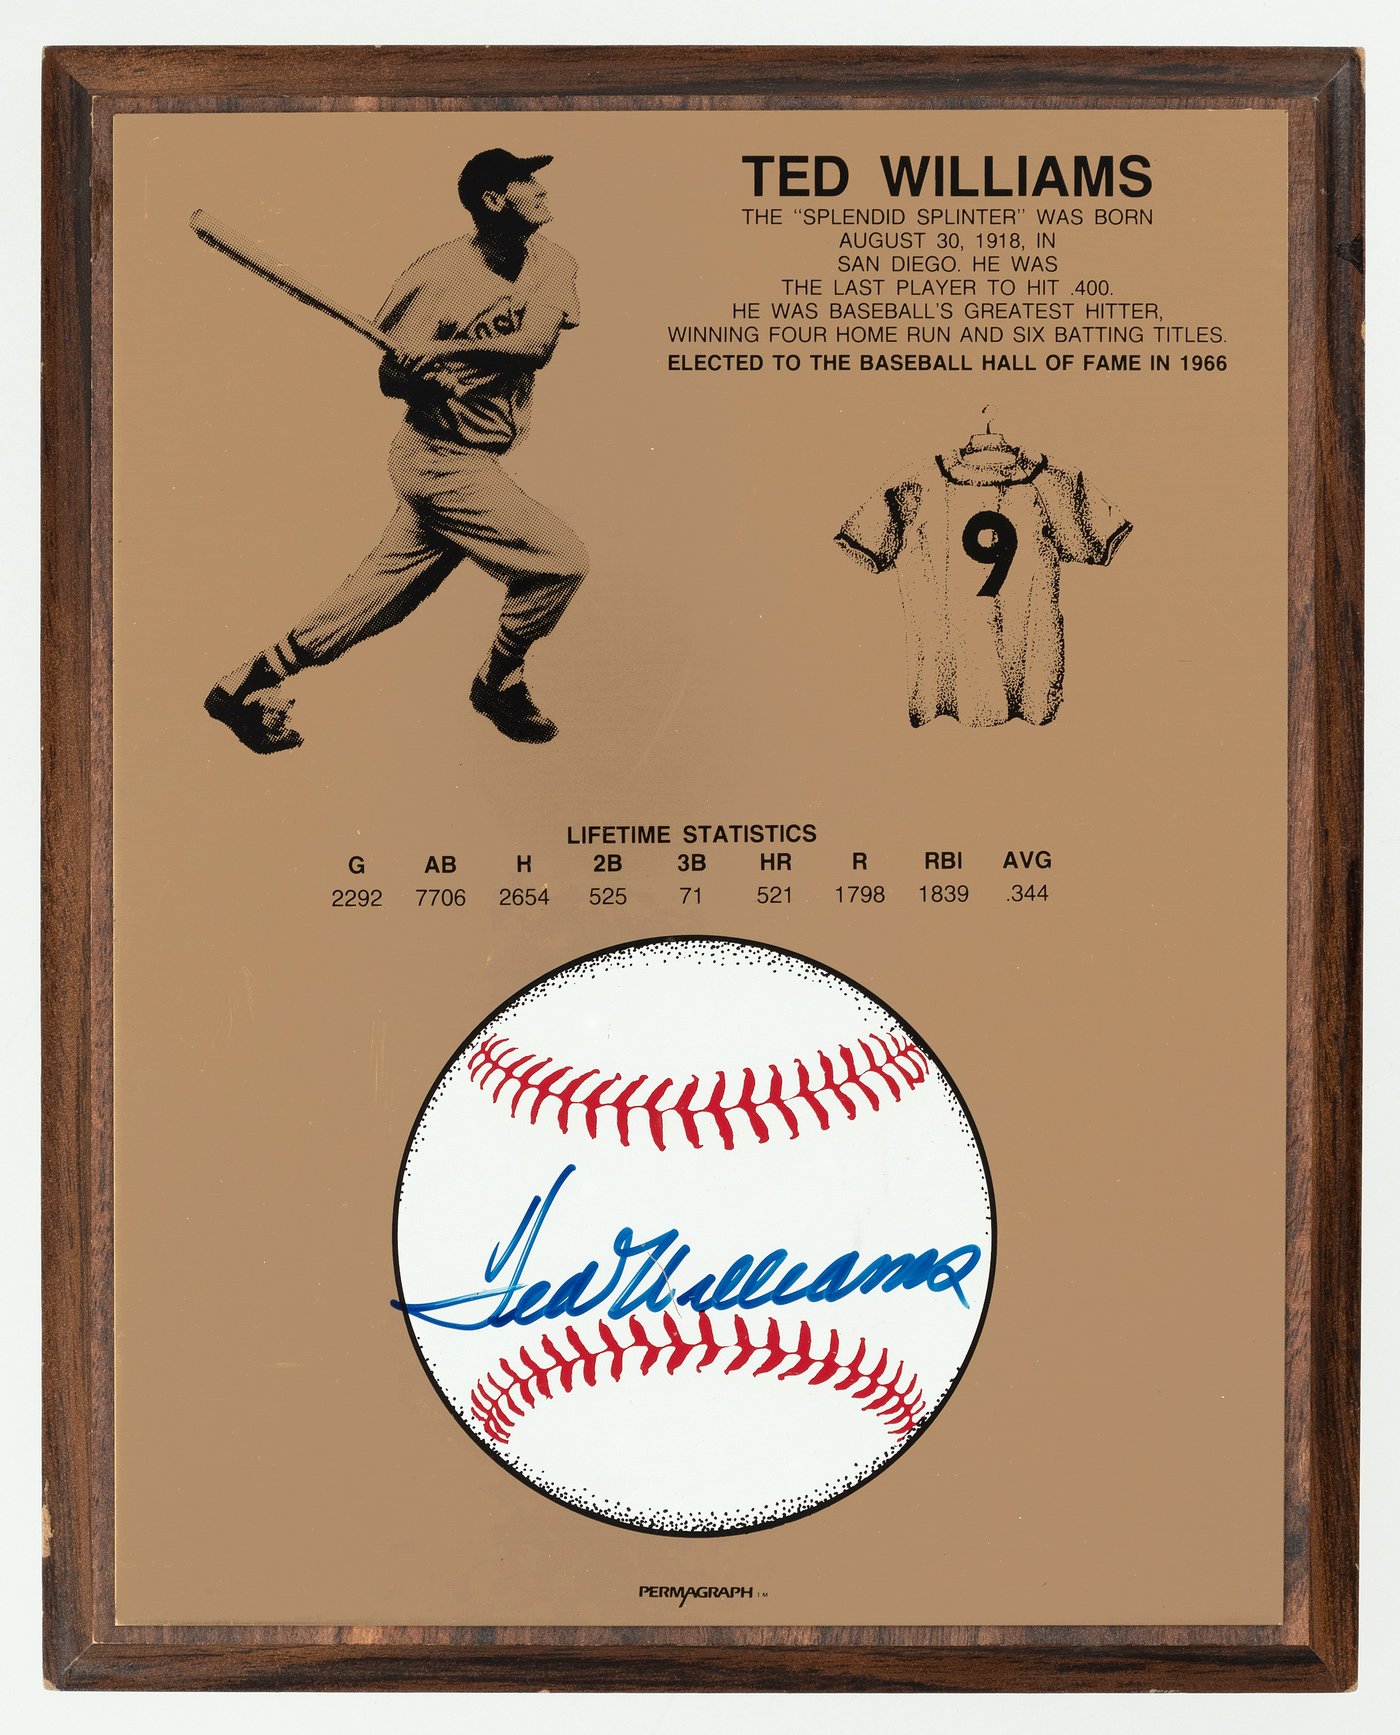 Hake's - TED WILLIAMS (HOF) SIGNED BASEBALL STATS PLAQUE.